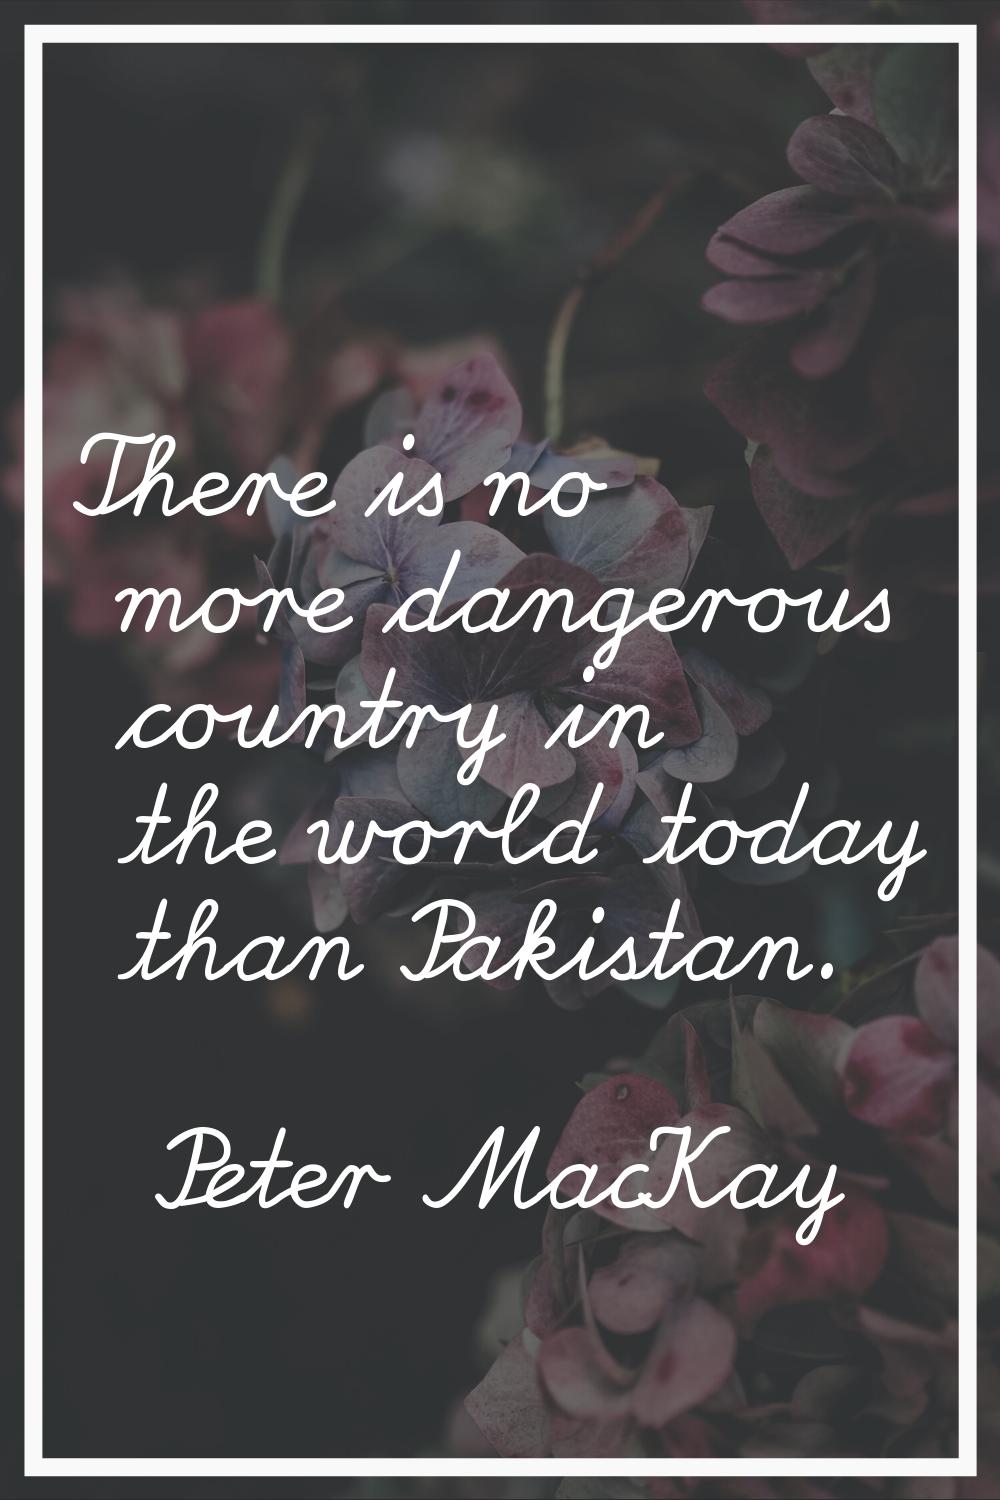 There is no more dangerous country in the world today than Pakistan.